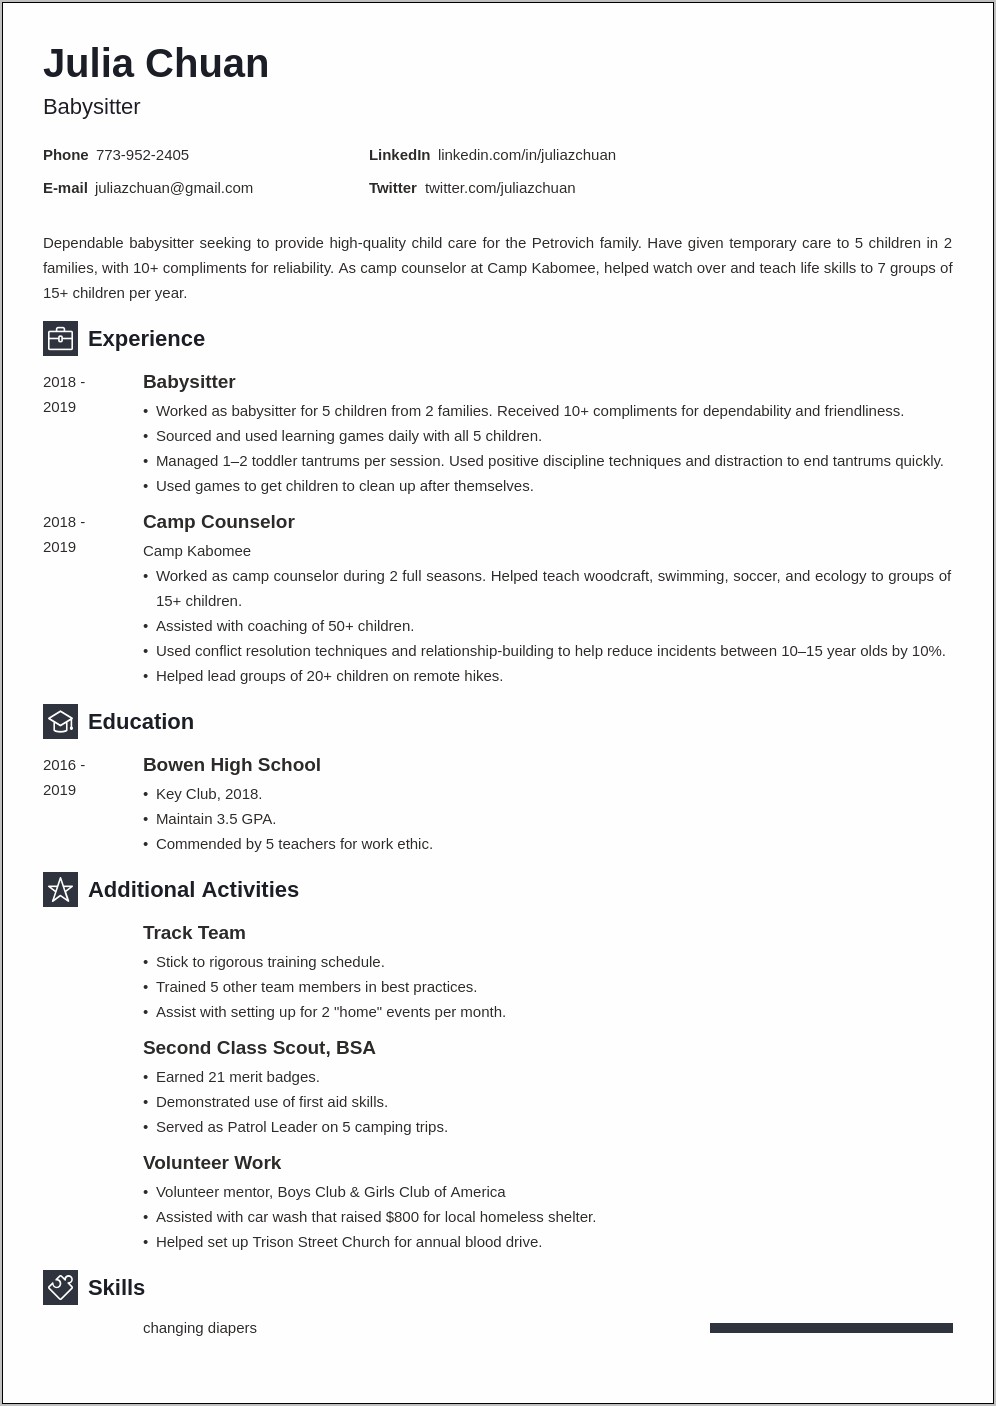 Do You Put Volunteer Experience On A Resume